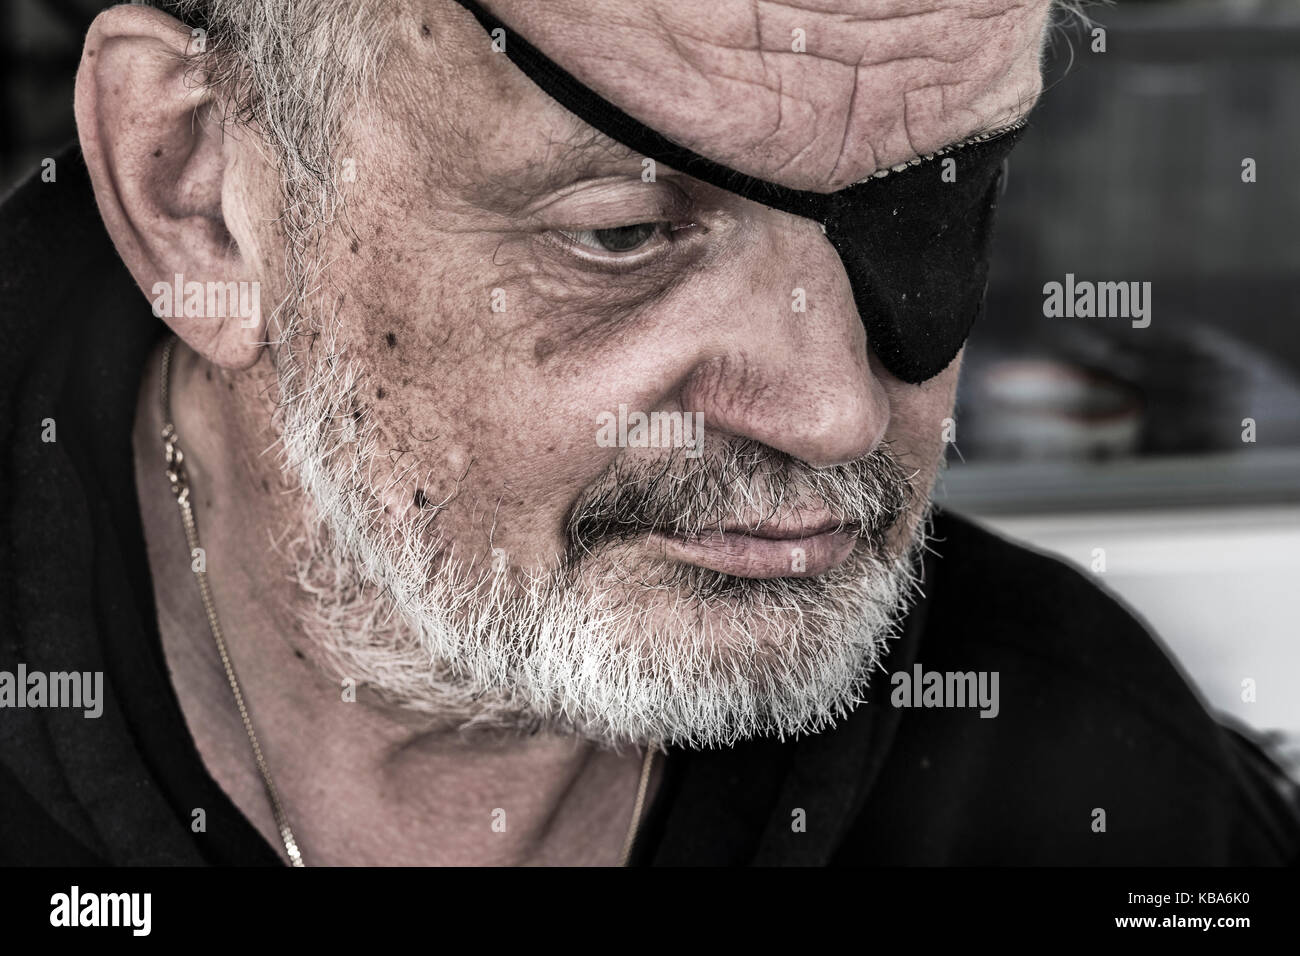 Cropped portrait of a bearded senior man with eye patches Stock Photo